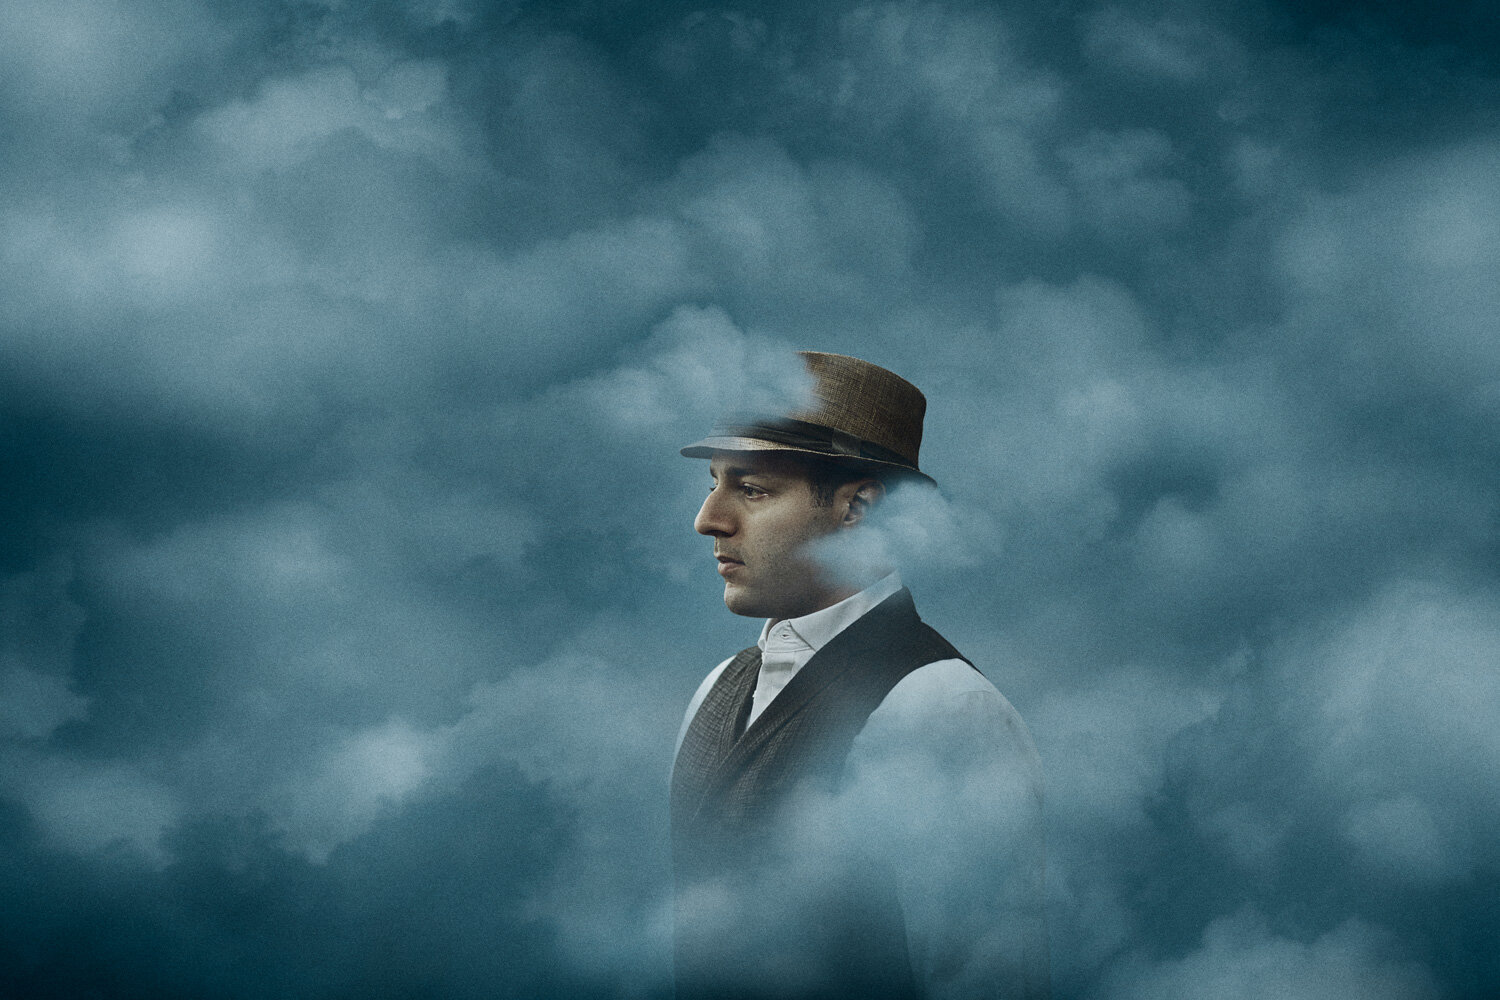 surreal portrait of singer in vintage outfit surrounded by clouds by conceptual portrait photographer Hanna Agar